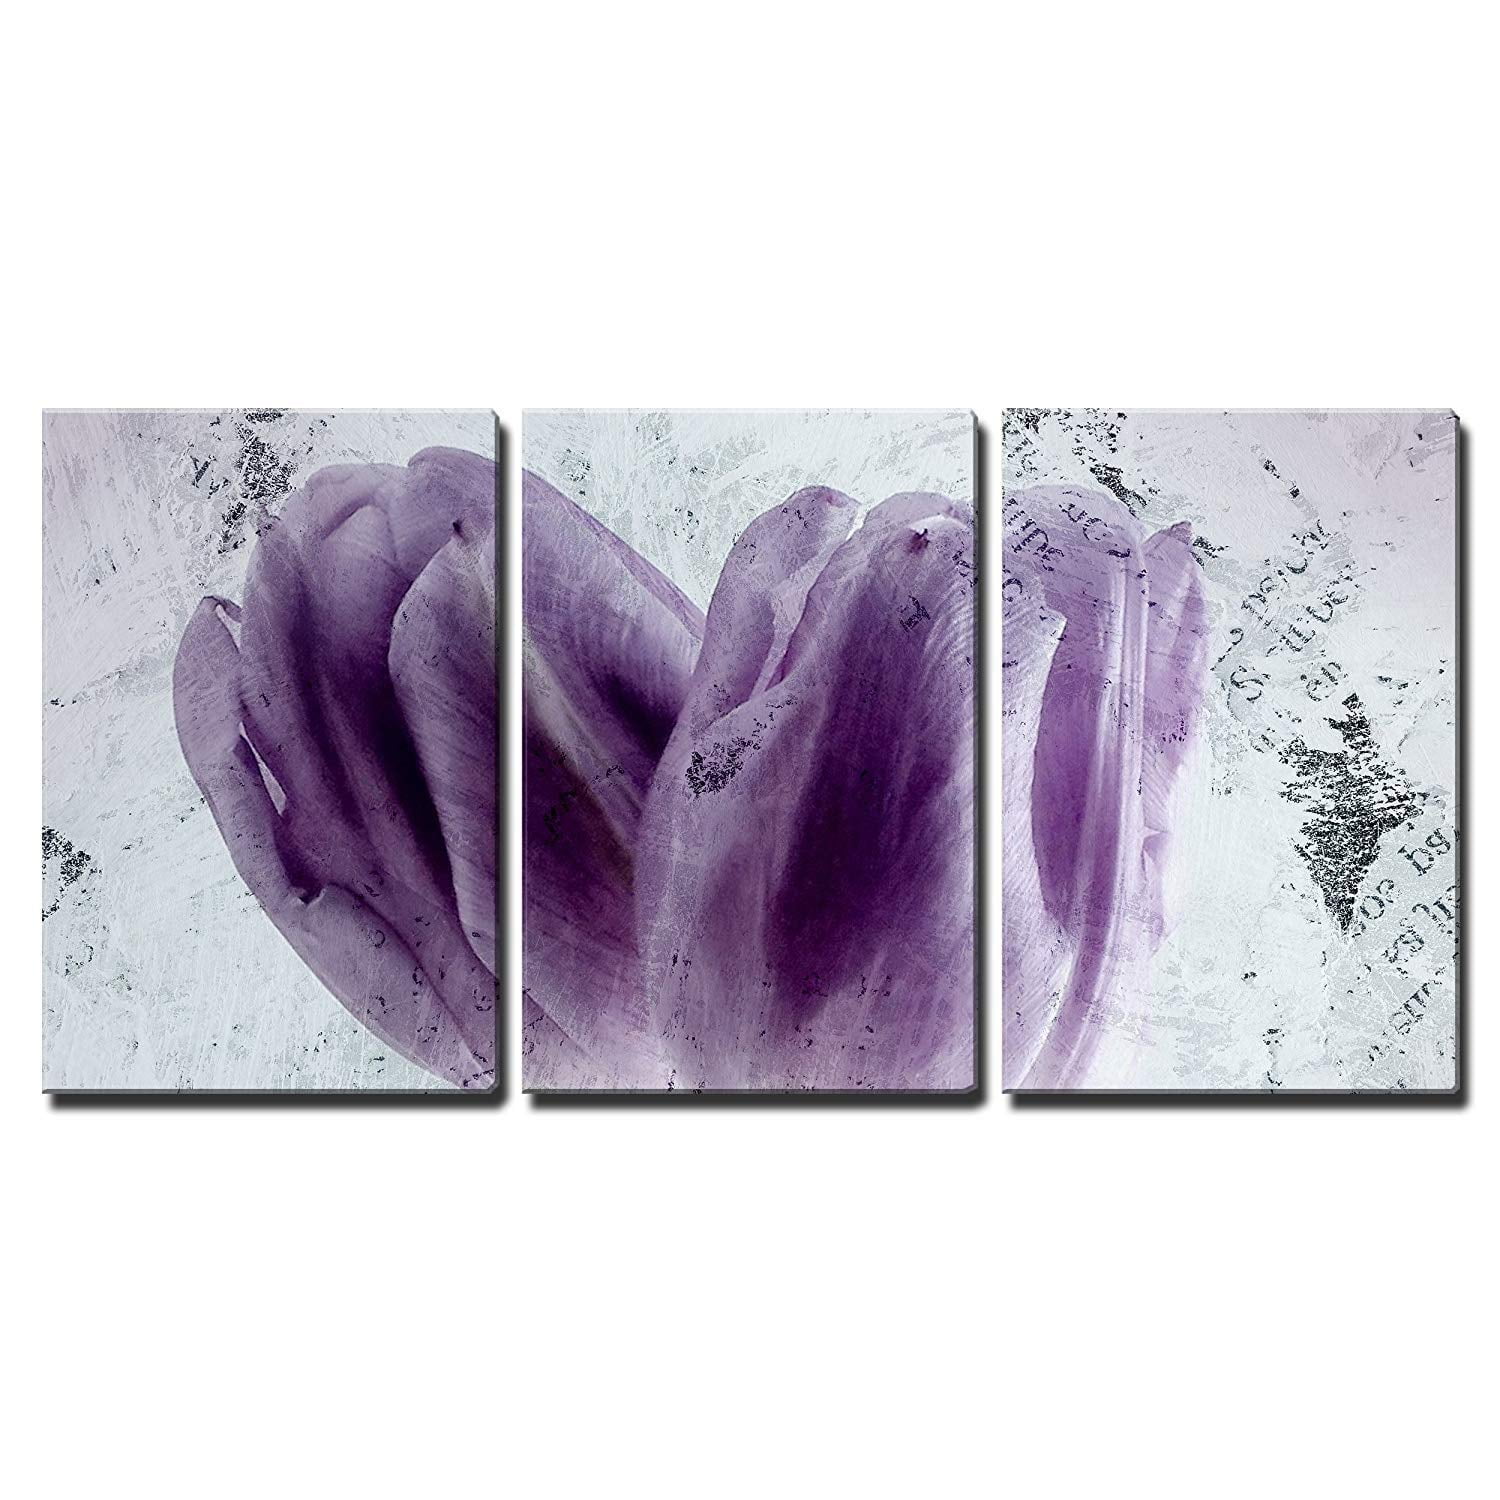 Canvas Wall Art Home Decor 12x18 inches Two Purple Tulip Flower Petals Wall26 